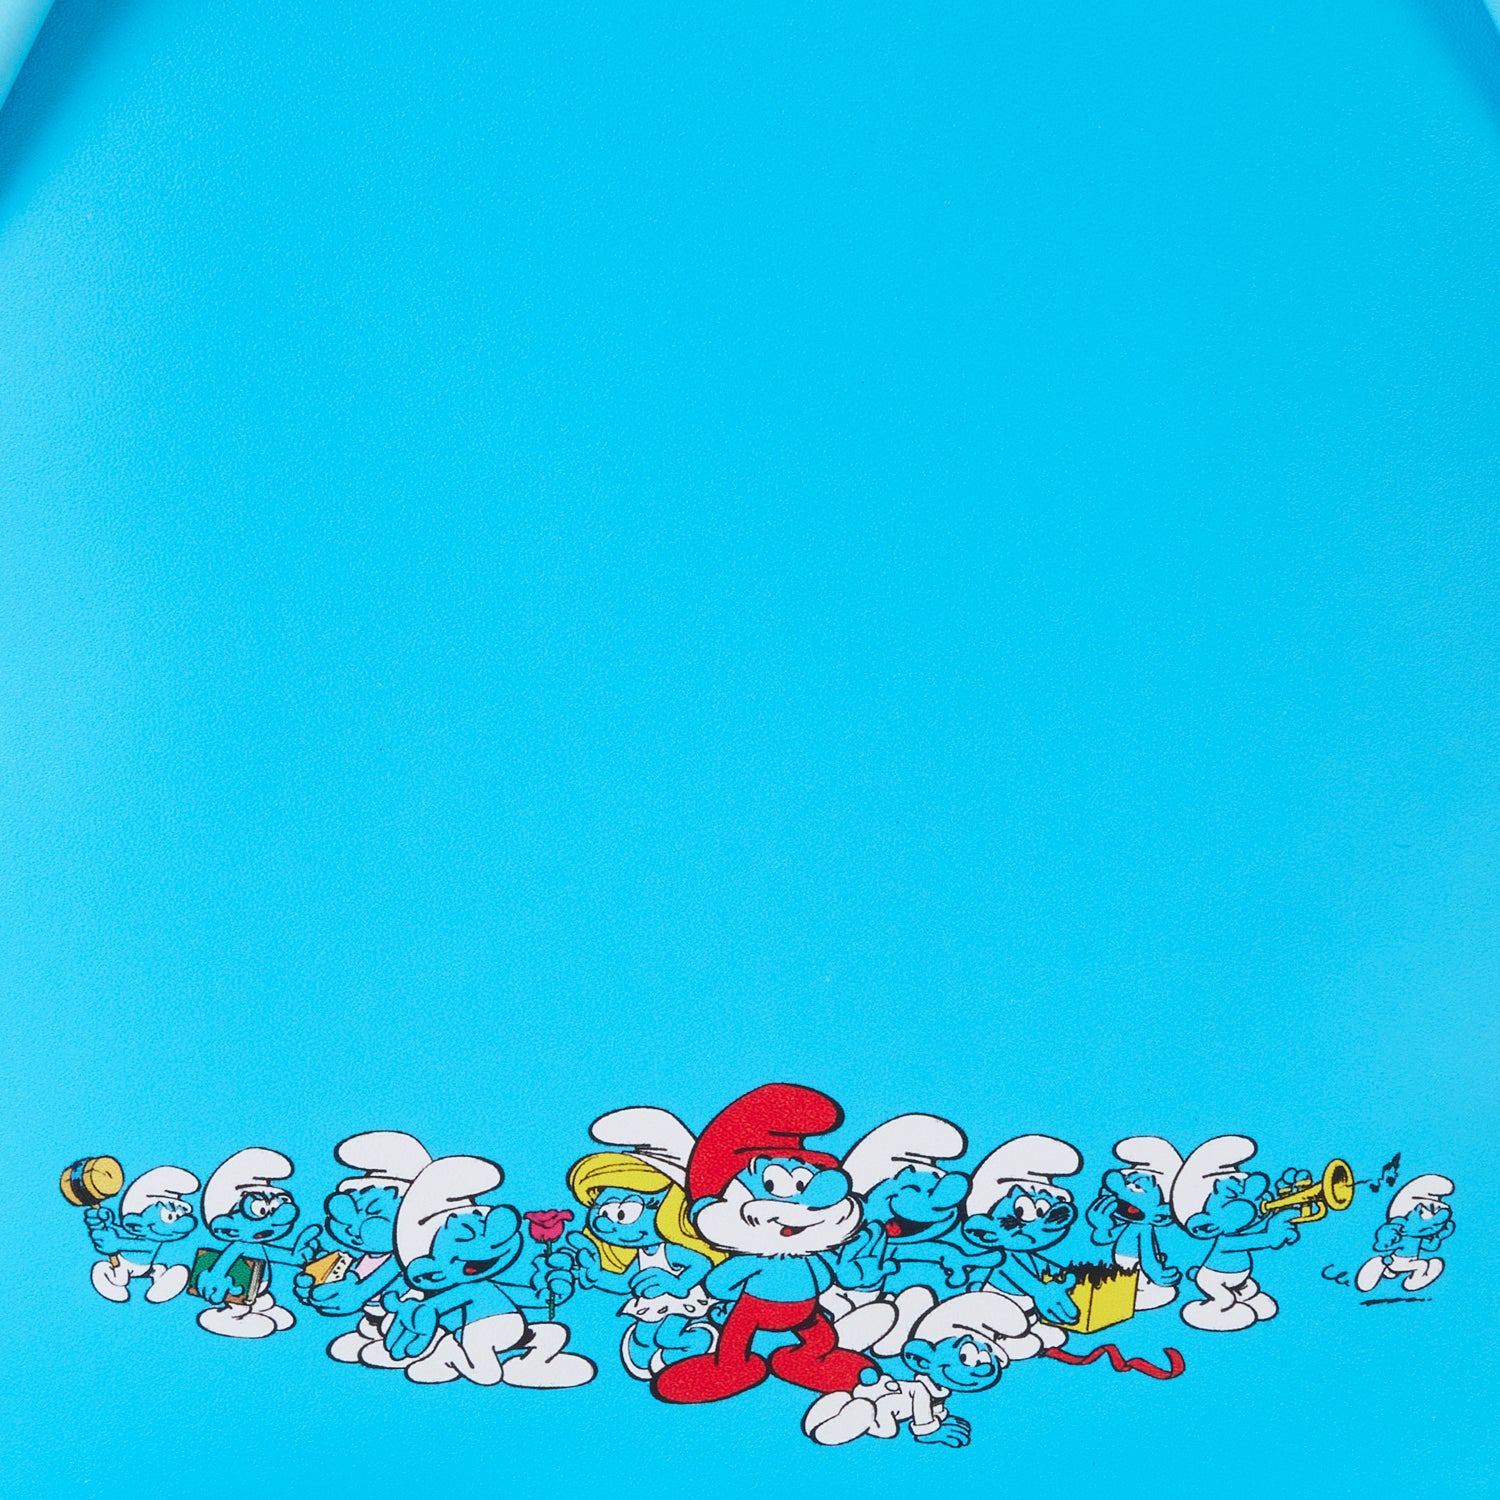 The Smurfs | Smurfette Cosplay Mini Backpack